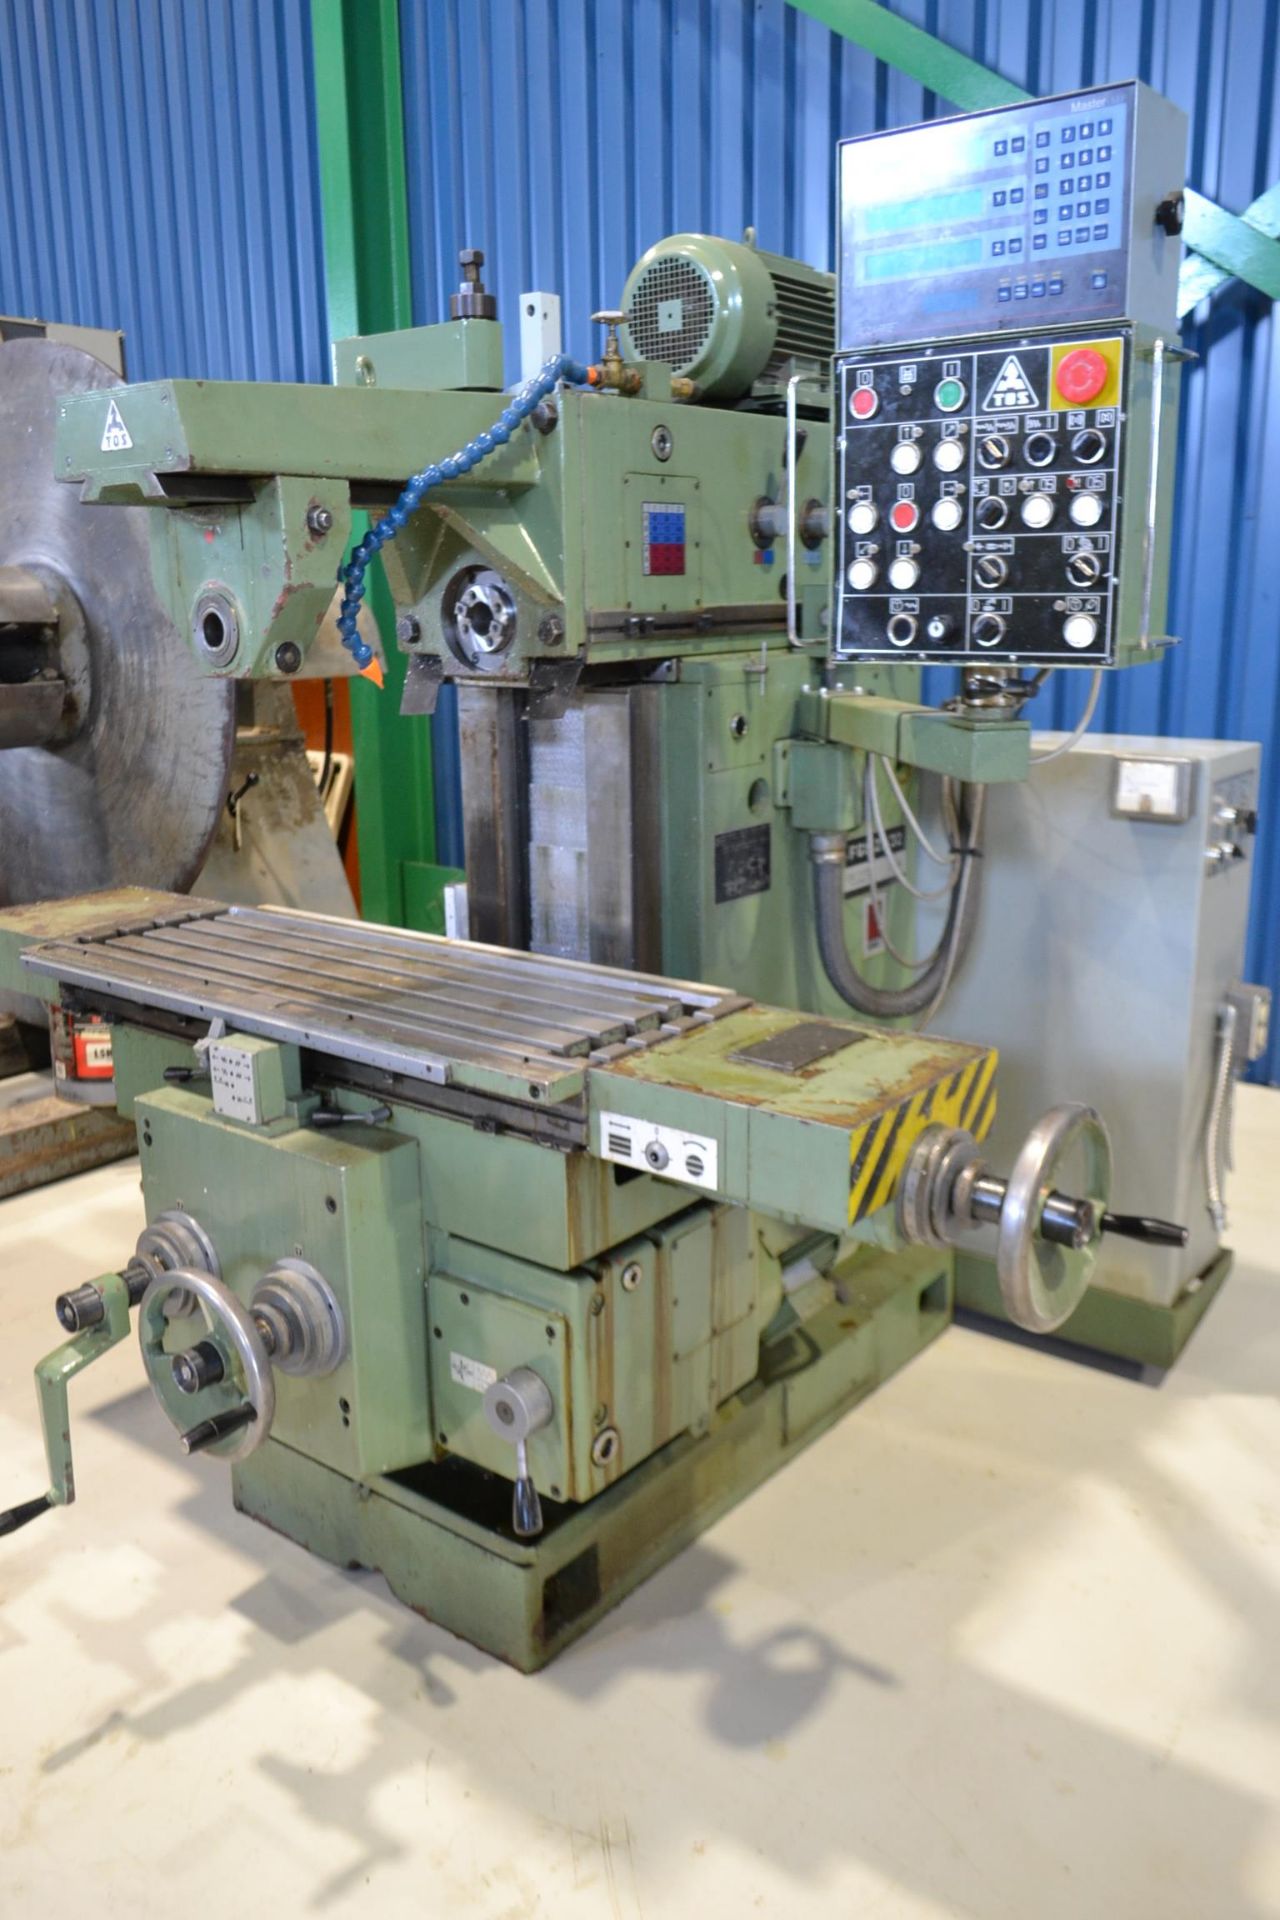 TOS MILLING (HORZ) MOD. FGS25.32, 15" X 39" TABLE, S/N: 251300199